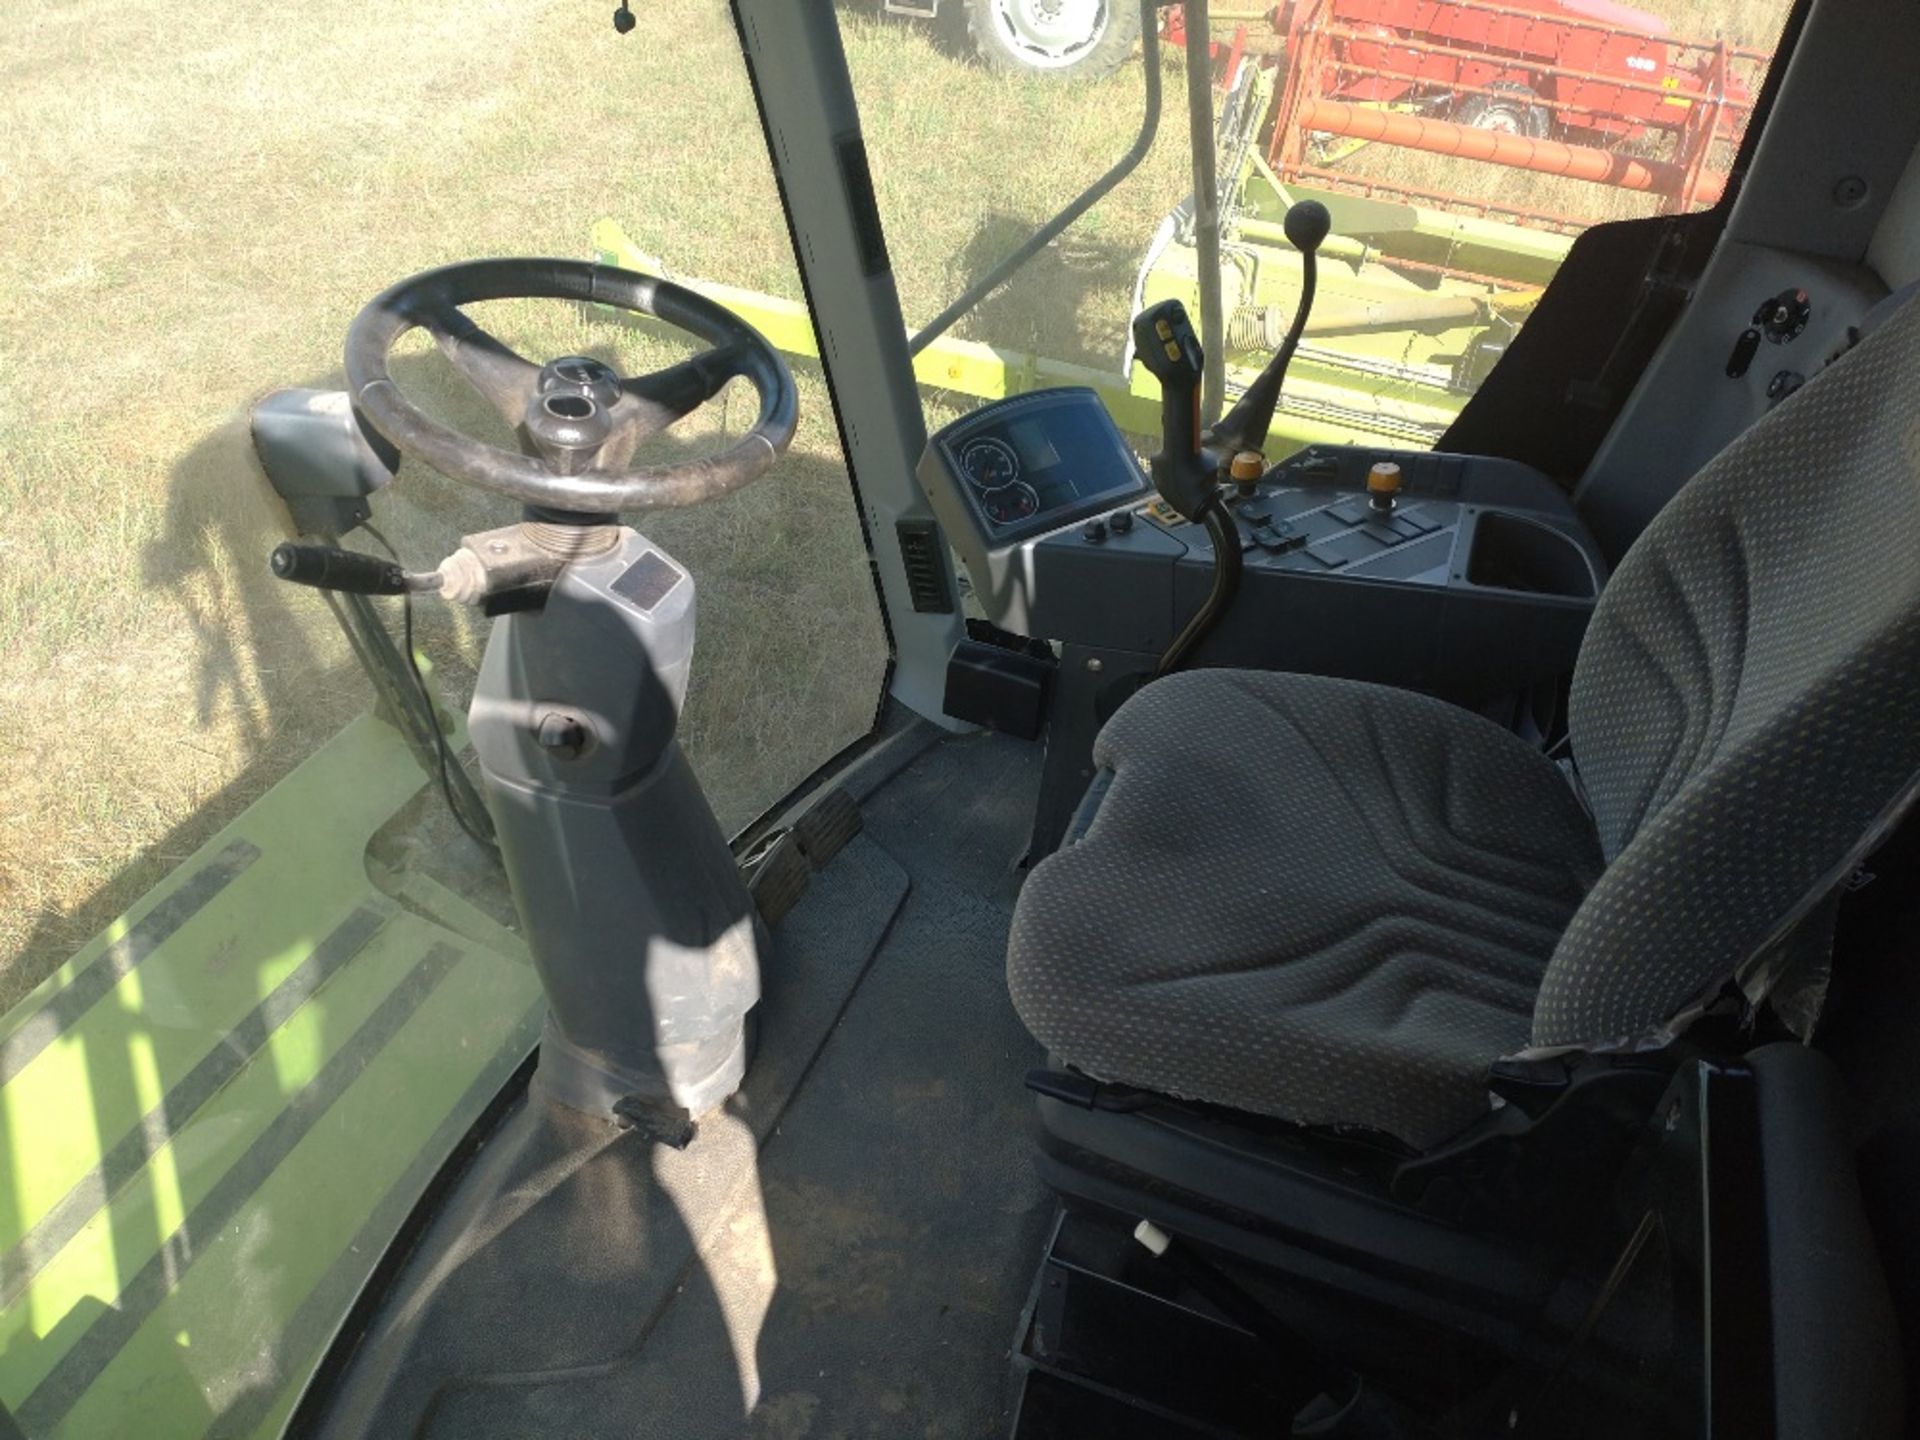 2009 Claas Avero 240 Combine with C490 Header, Reg: FX09 KUO, s/n 45100021,Ceres 800i Monitor, - Image 8 of 11